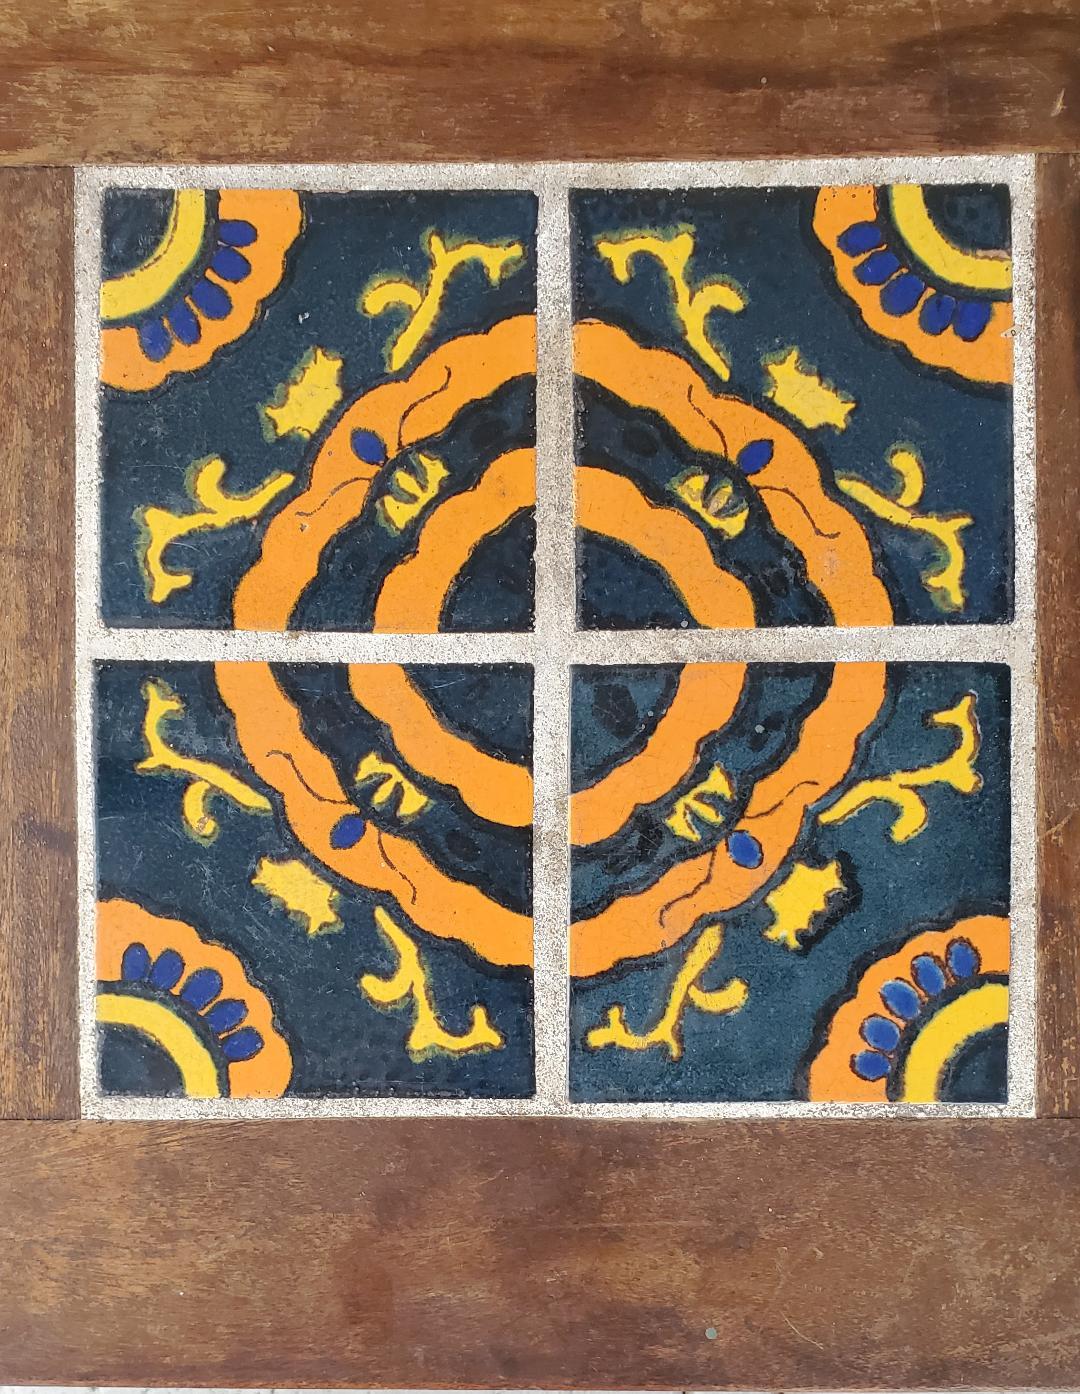 Early 20th Century Catalina Tile Table Mission Craftsman Arts & Craft Spanish  For Sale 10